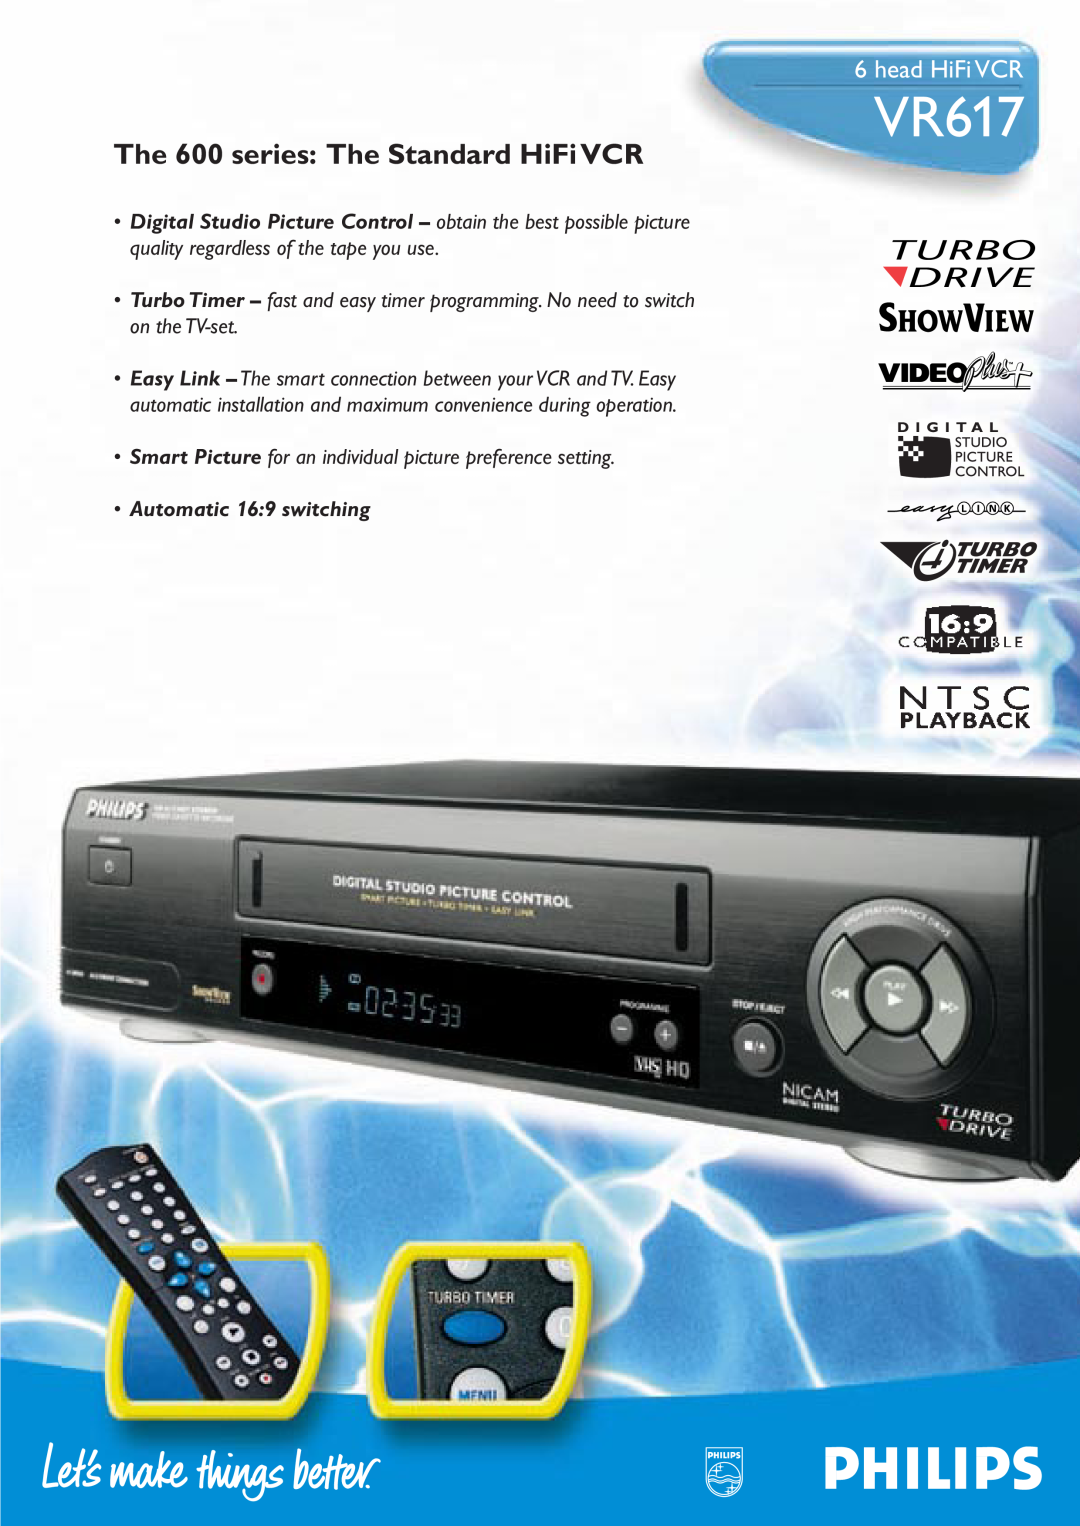 Philips VR617 manual head HiFi VCR, The 600 series The Standard HiFi VCR, quality regardless of the tape you use 